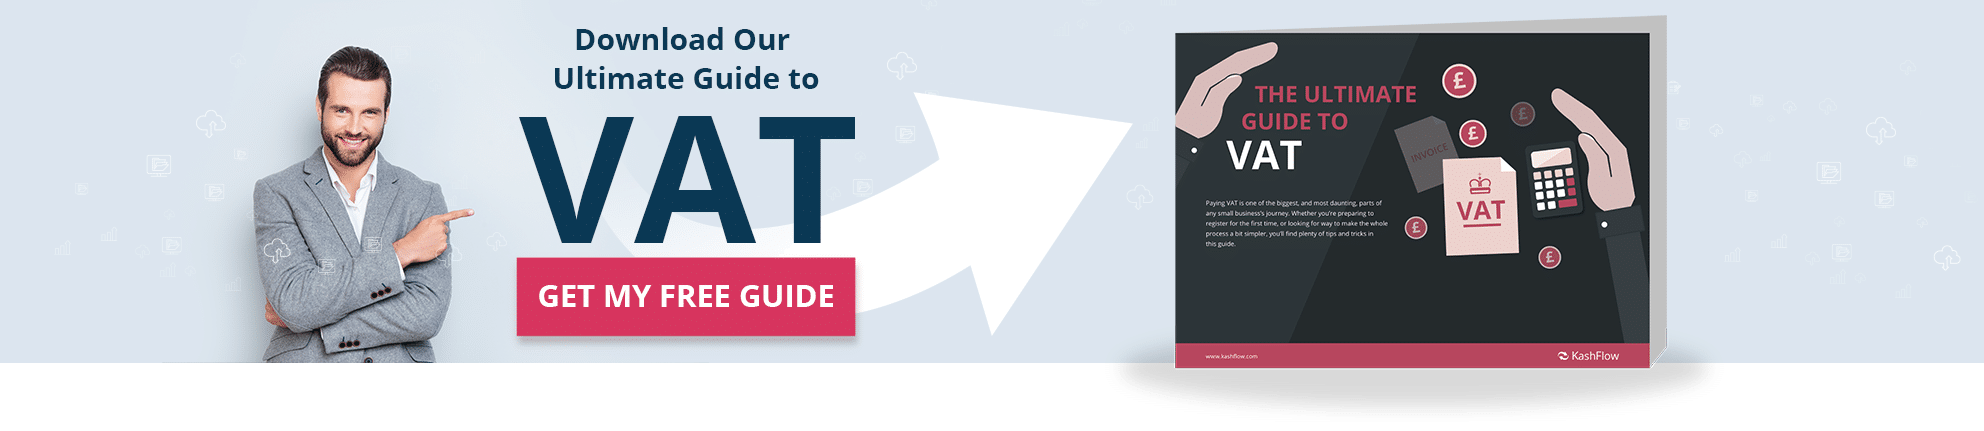 Ultimate guide to VAT.